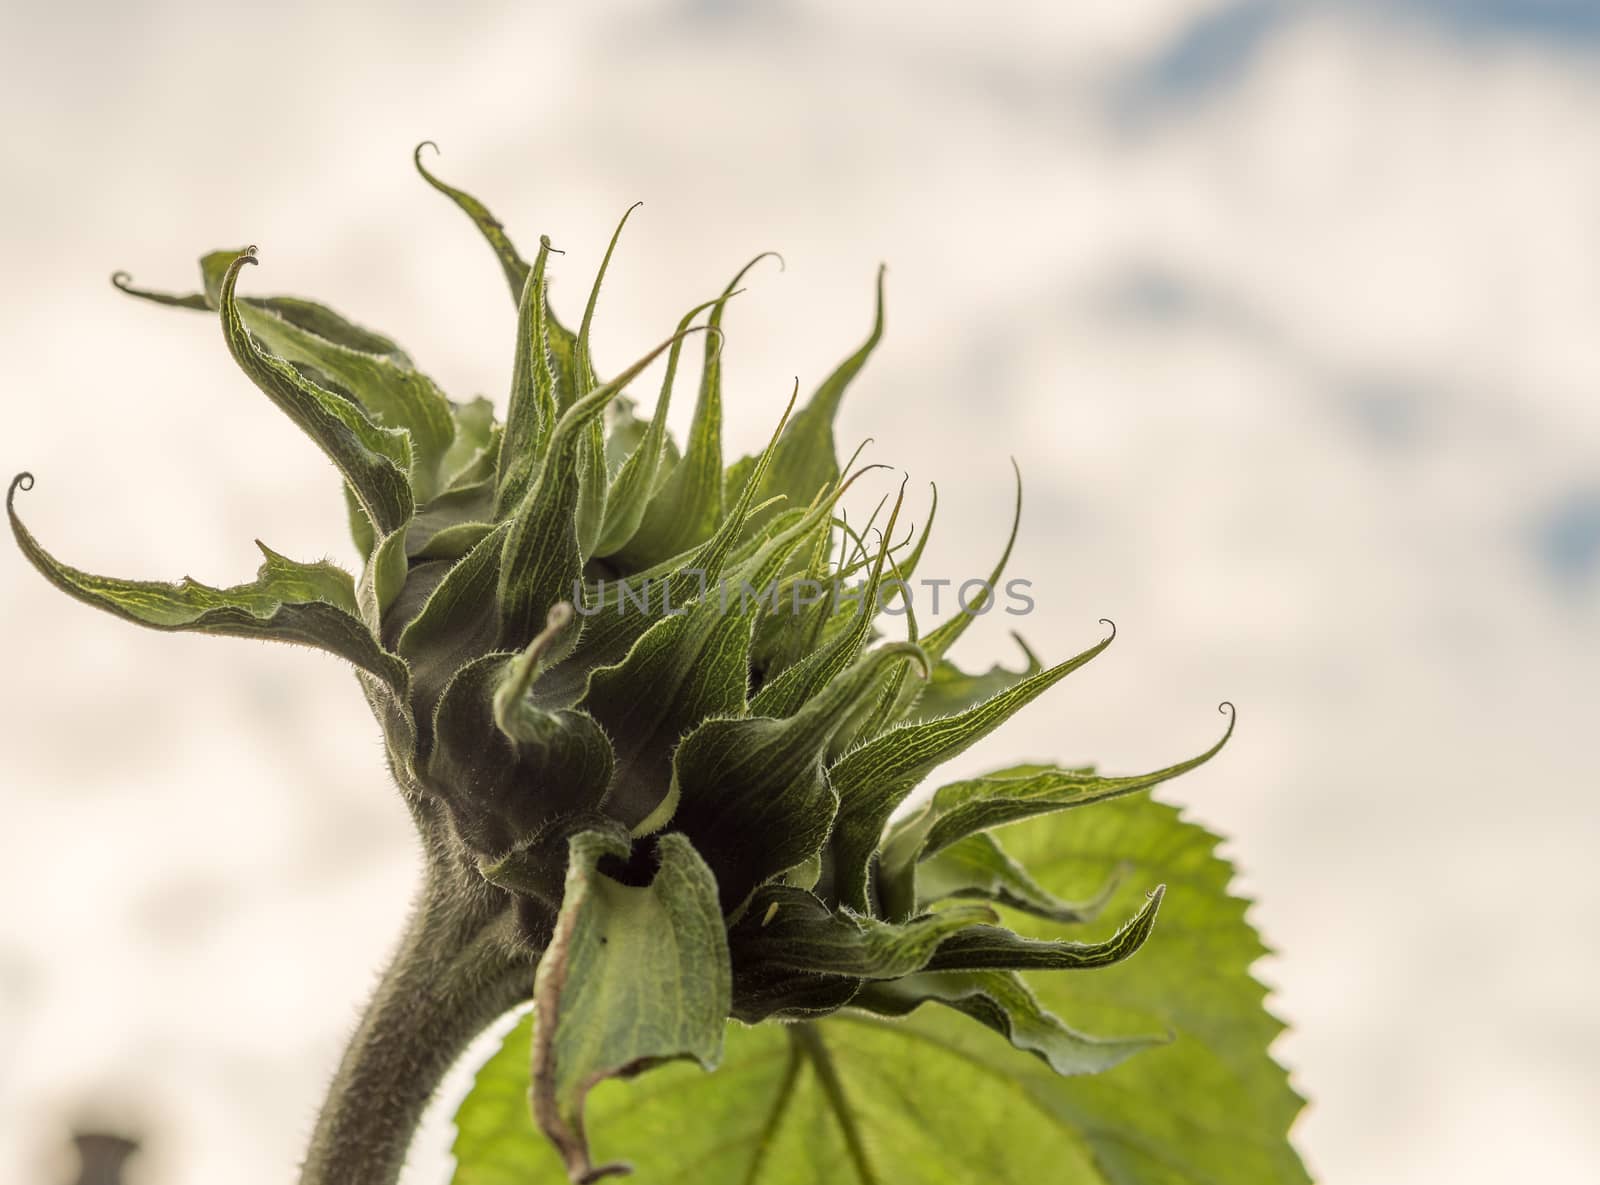 Low point of view looking up at a giant sunflower just before bloom